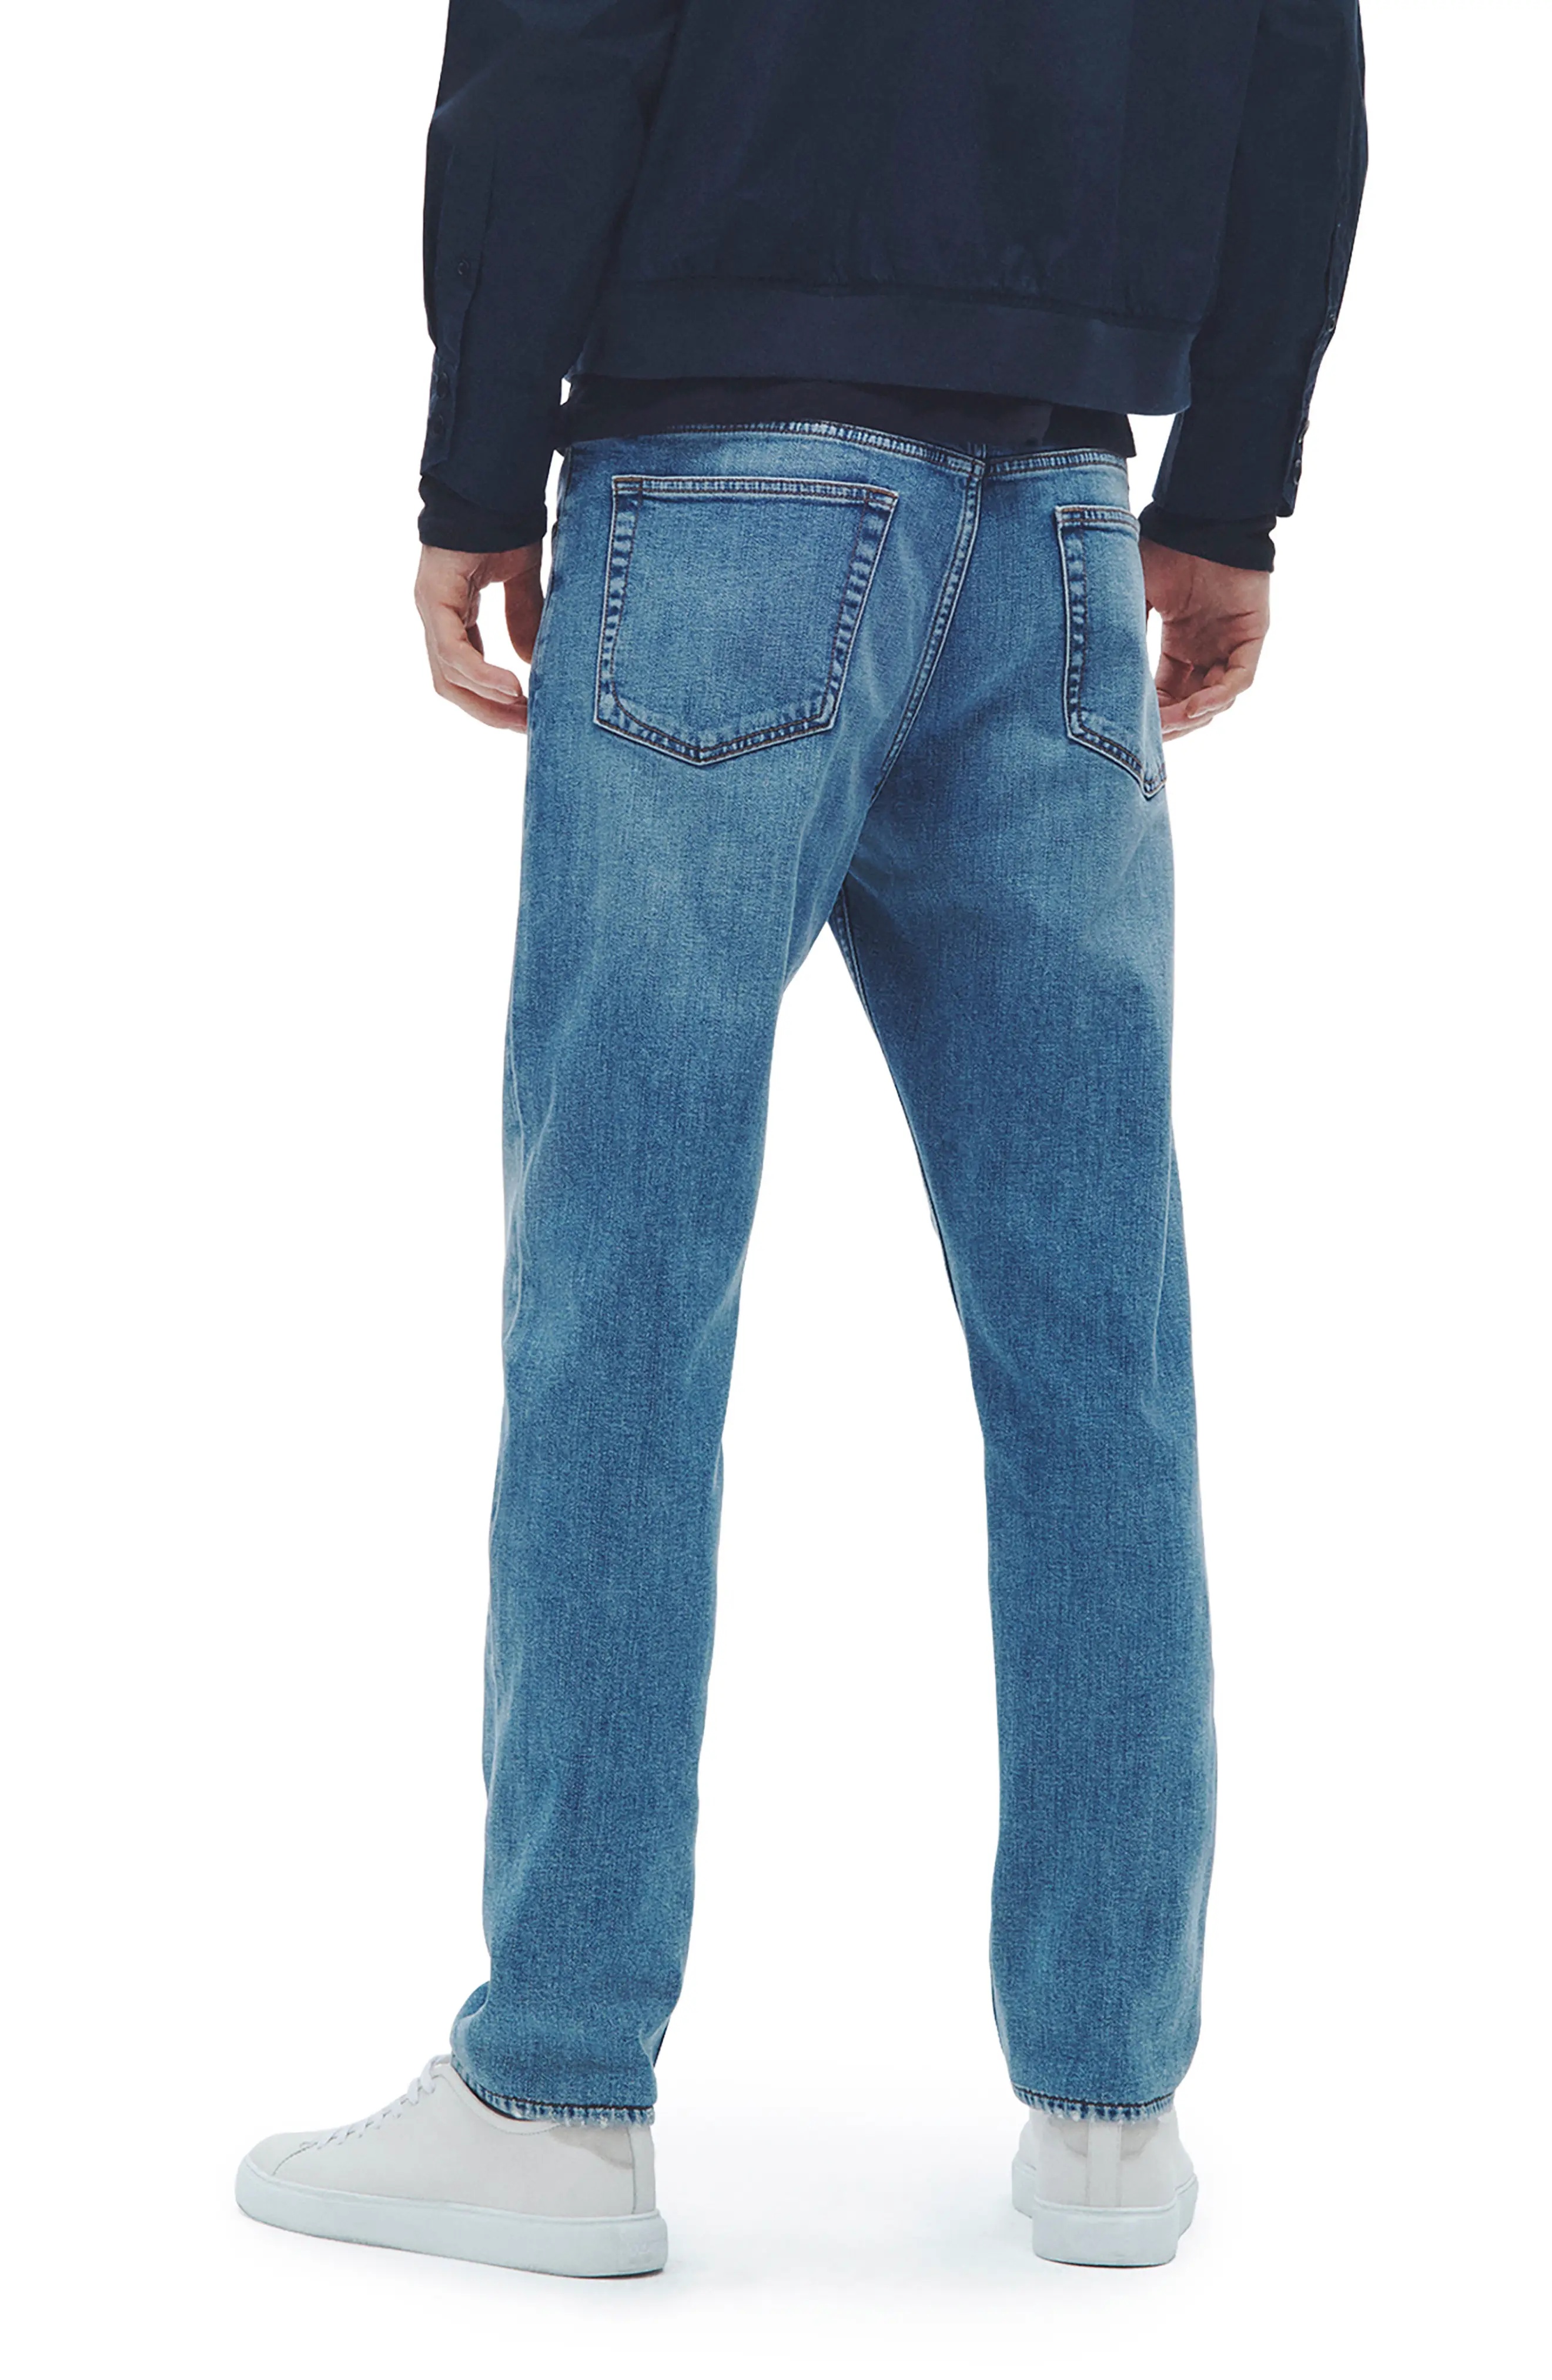 Fit 2 Authentic Stretch Slim Jeans - 2